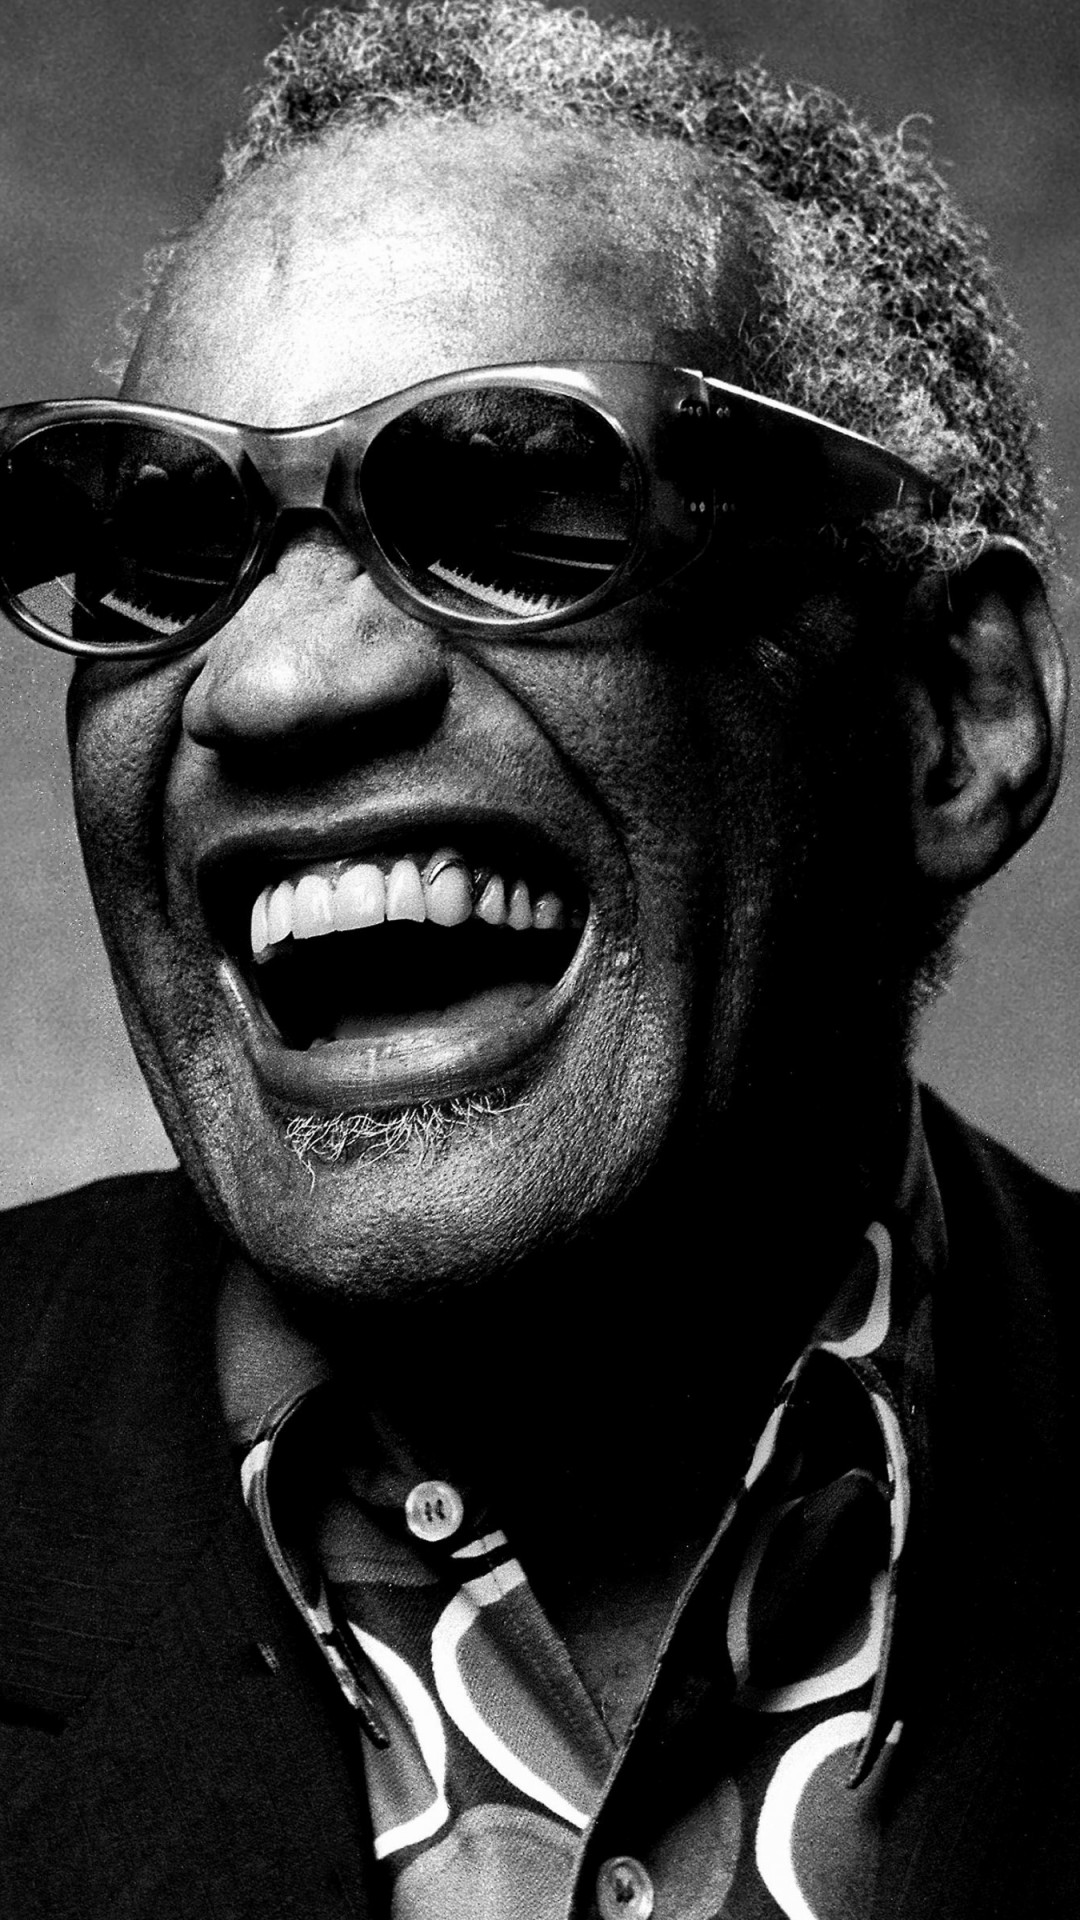 Ray Charles Portrait in Black & White Wallpaper for SAMSUNG Galaxy S5